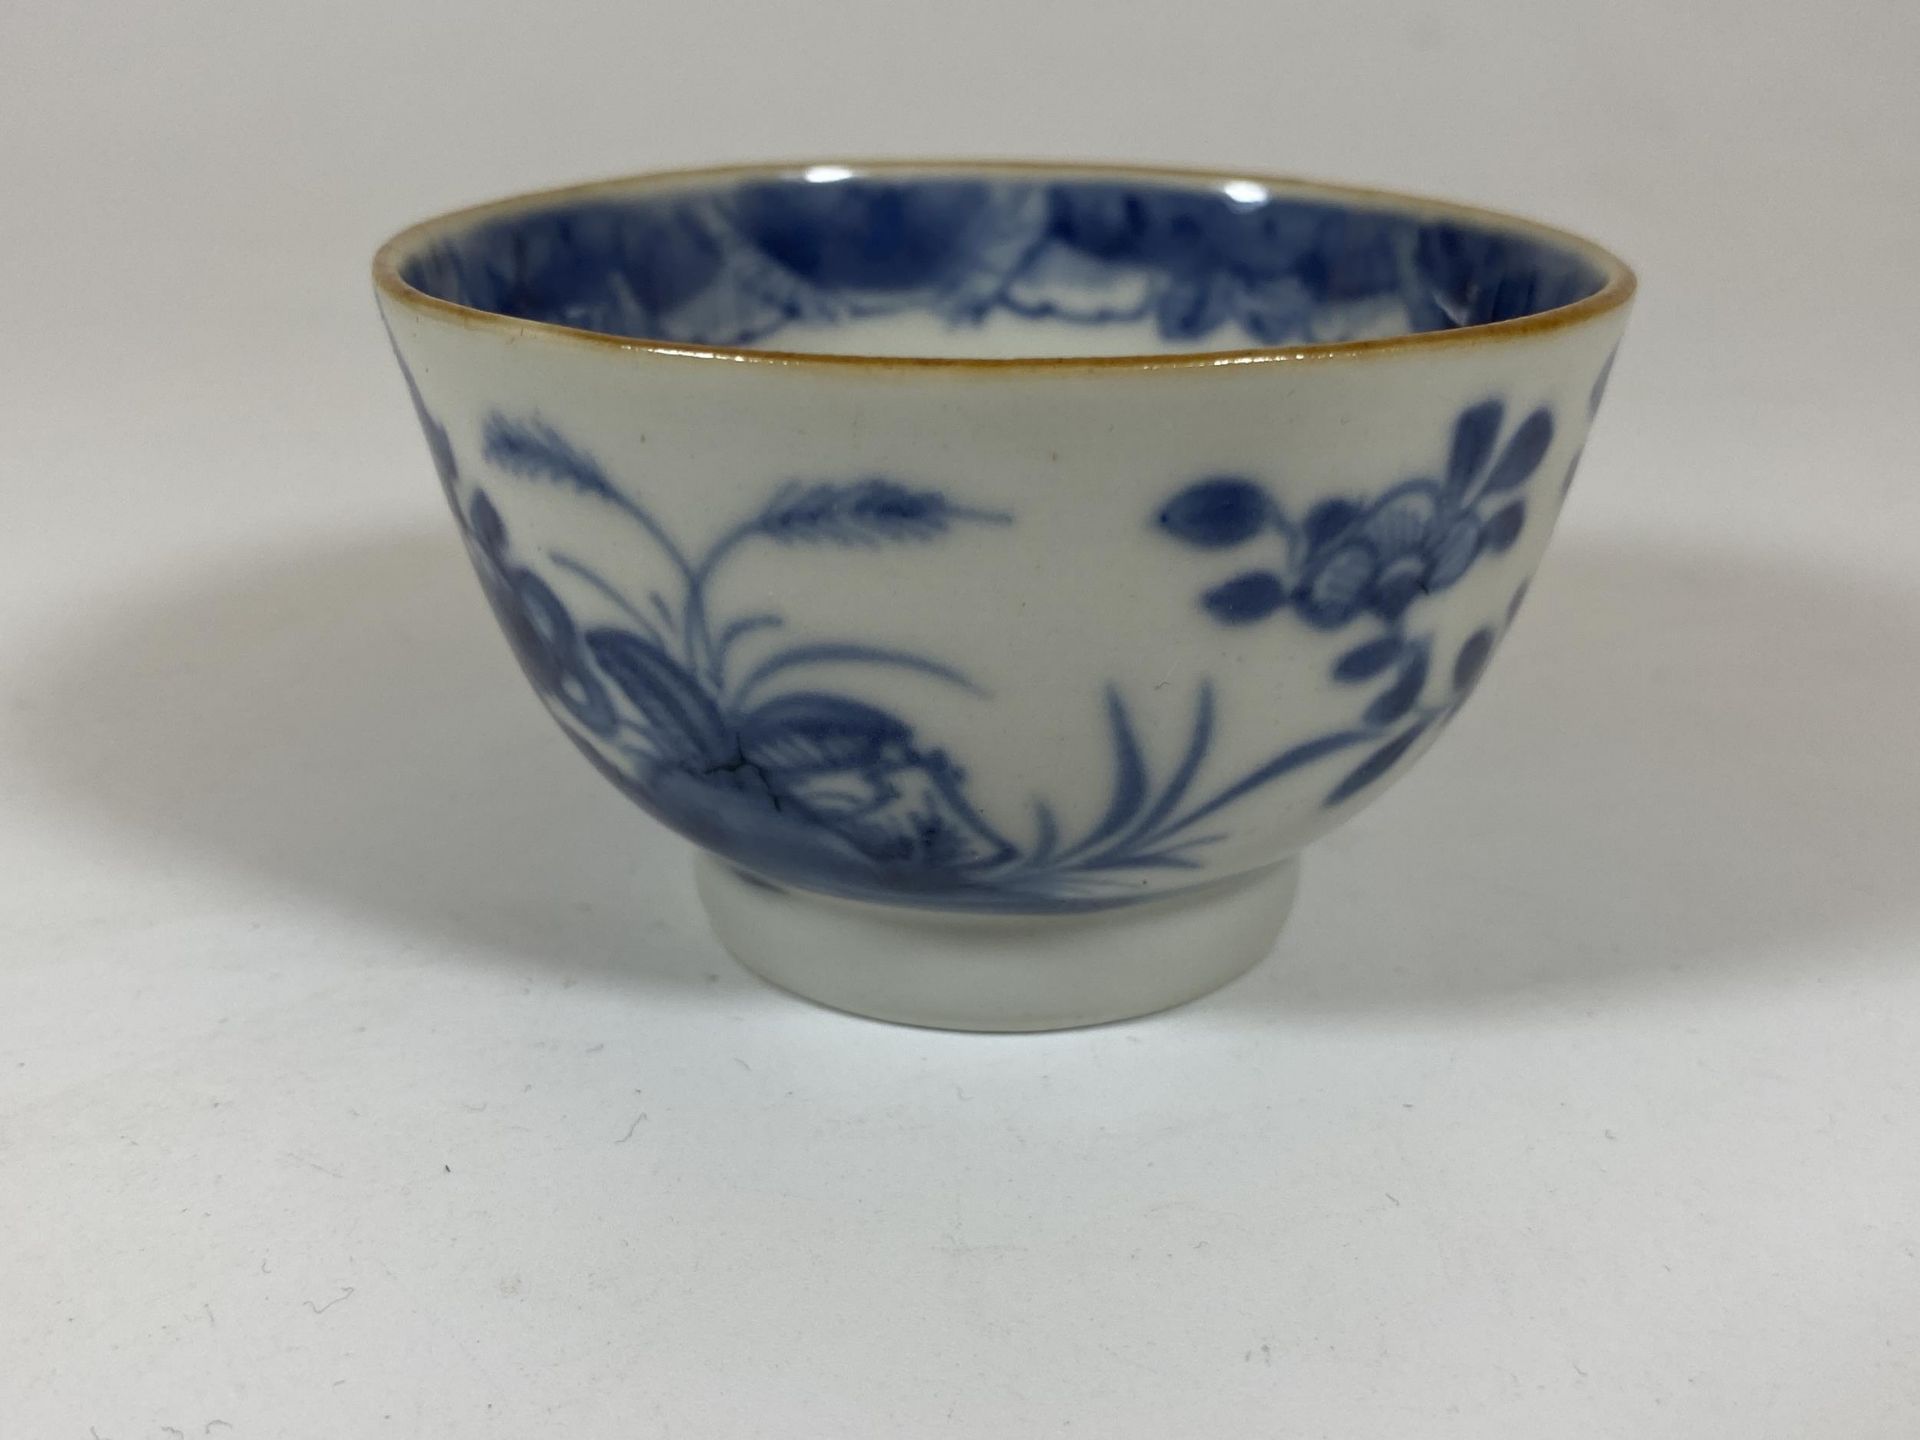 A 19TH CENTURY QING CHINESE BLUE AND WHITE PORCELAIN TEA BOWL, HEIGHT 4.5CM - Image 2 of 5